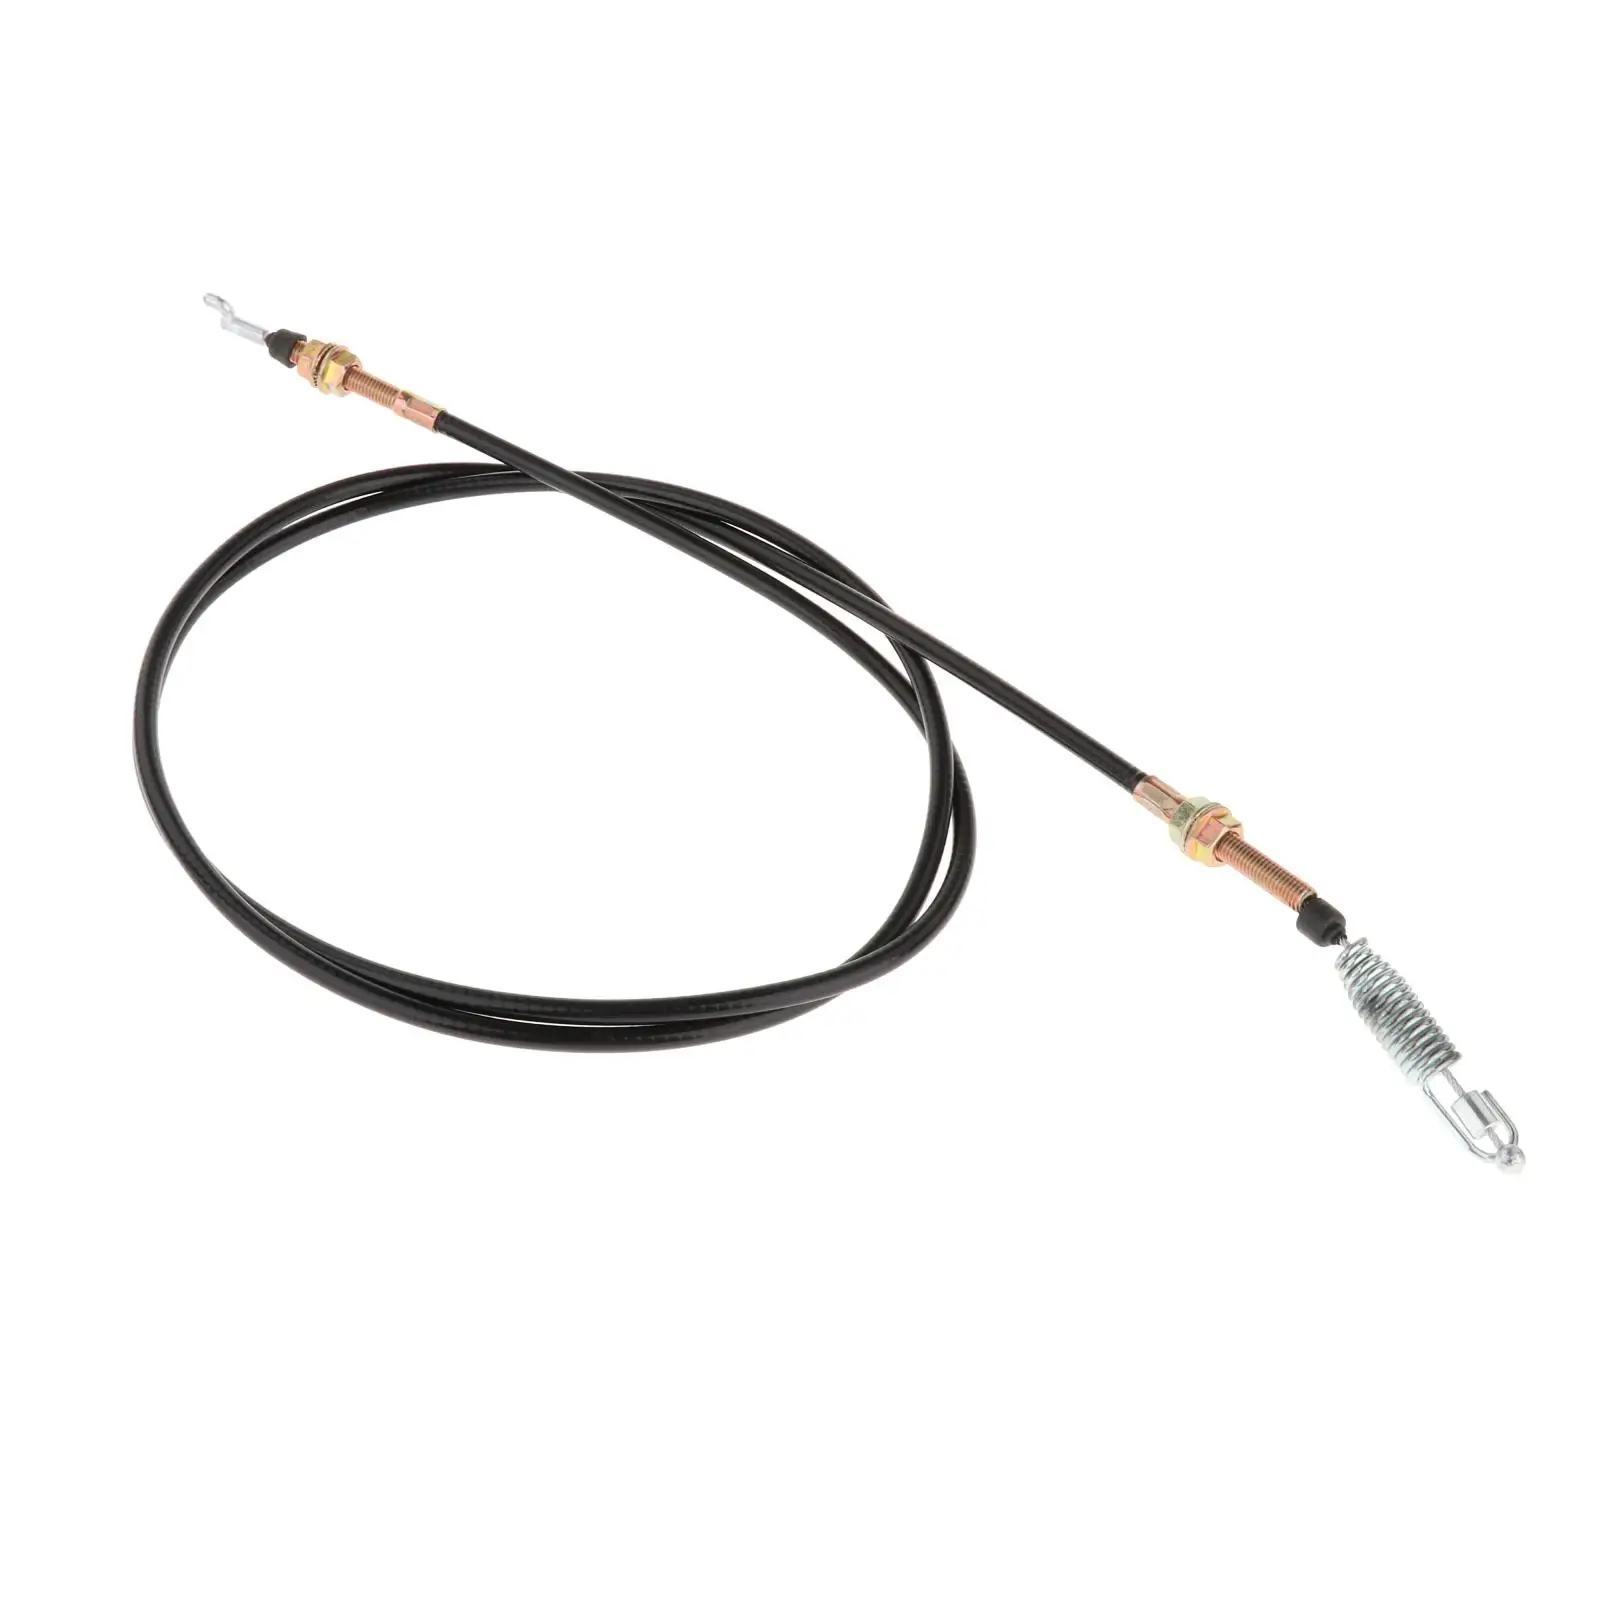 Shifter Cable Replacement suitable for Chuck Wagon Go-Karts 2-11082 Vehicle